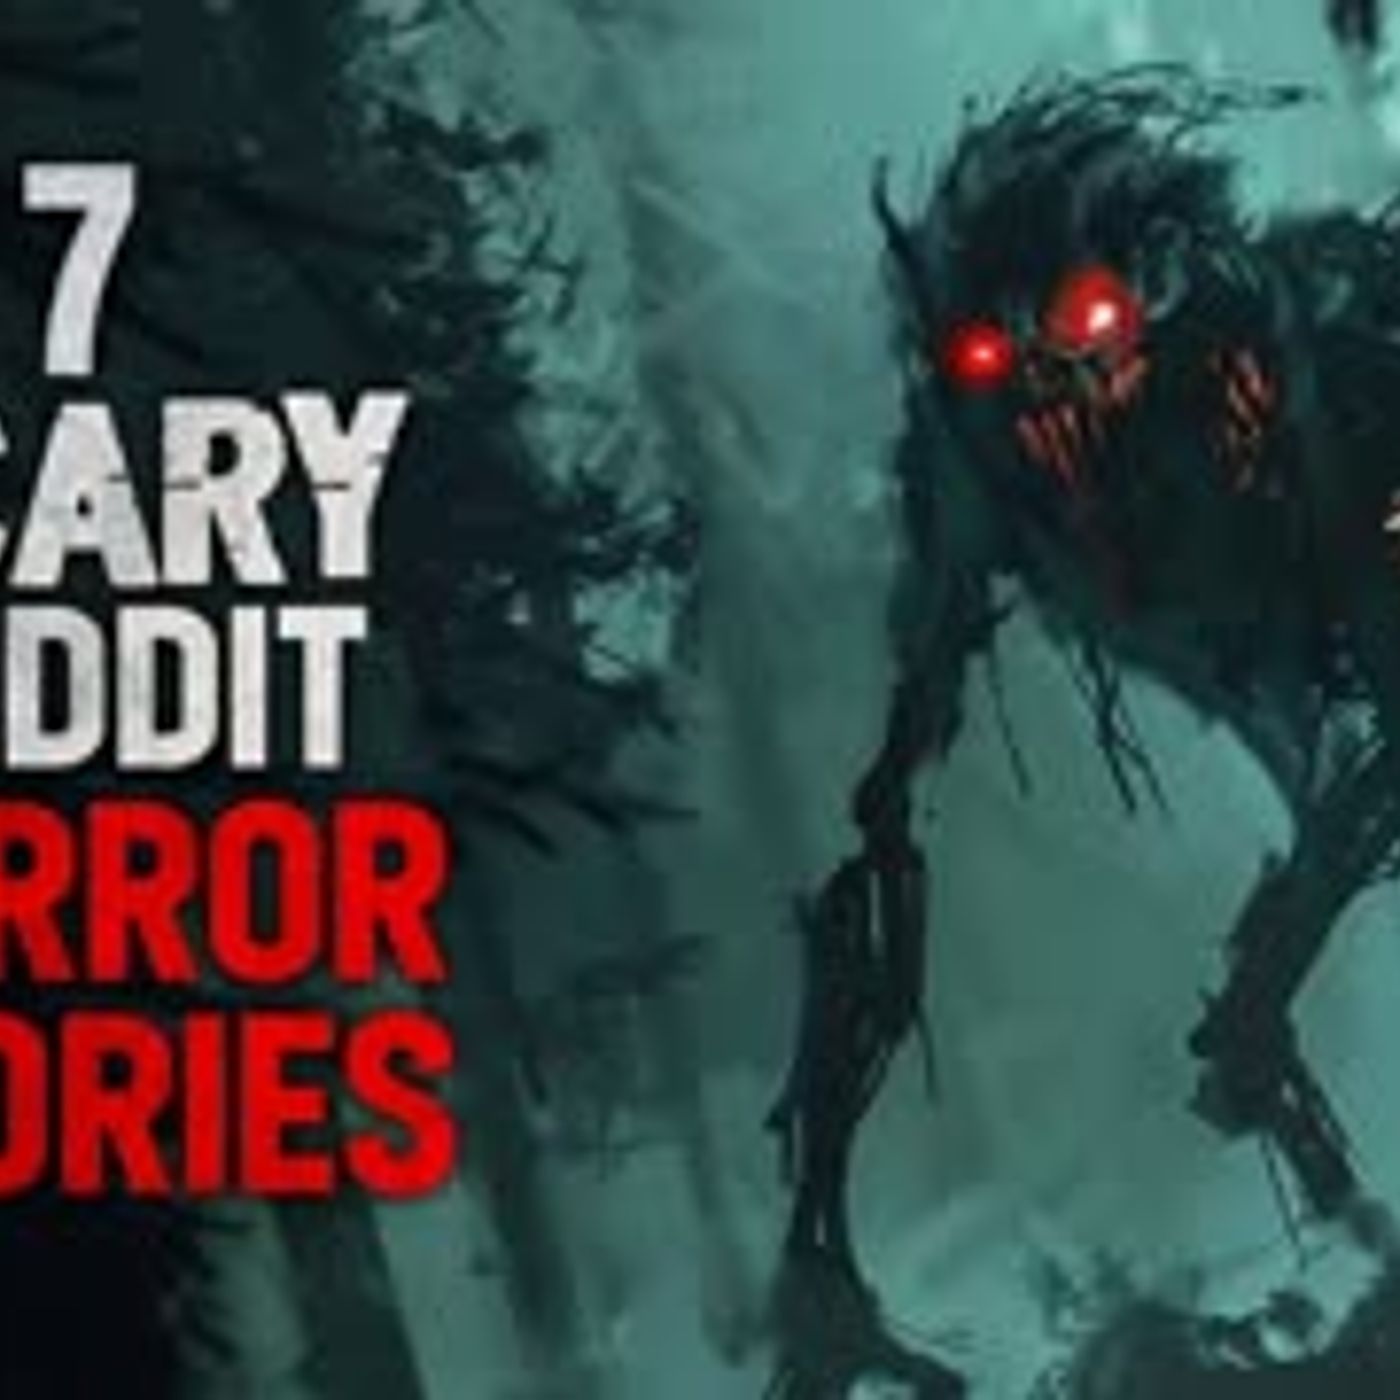 7 CHILLING r Nosleep Horror Stories to listen to while counting down the end of days